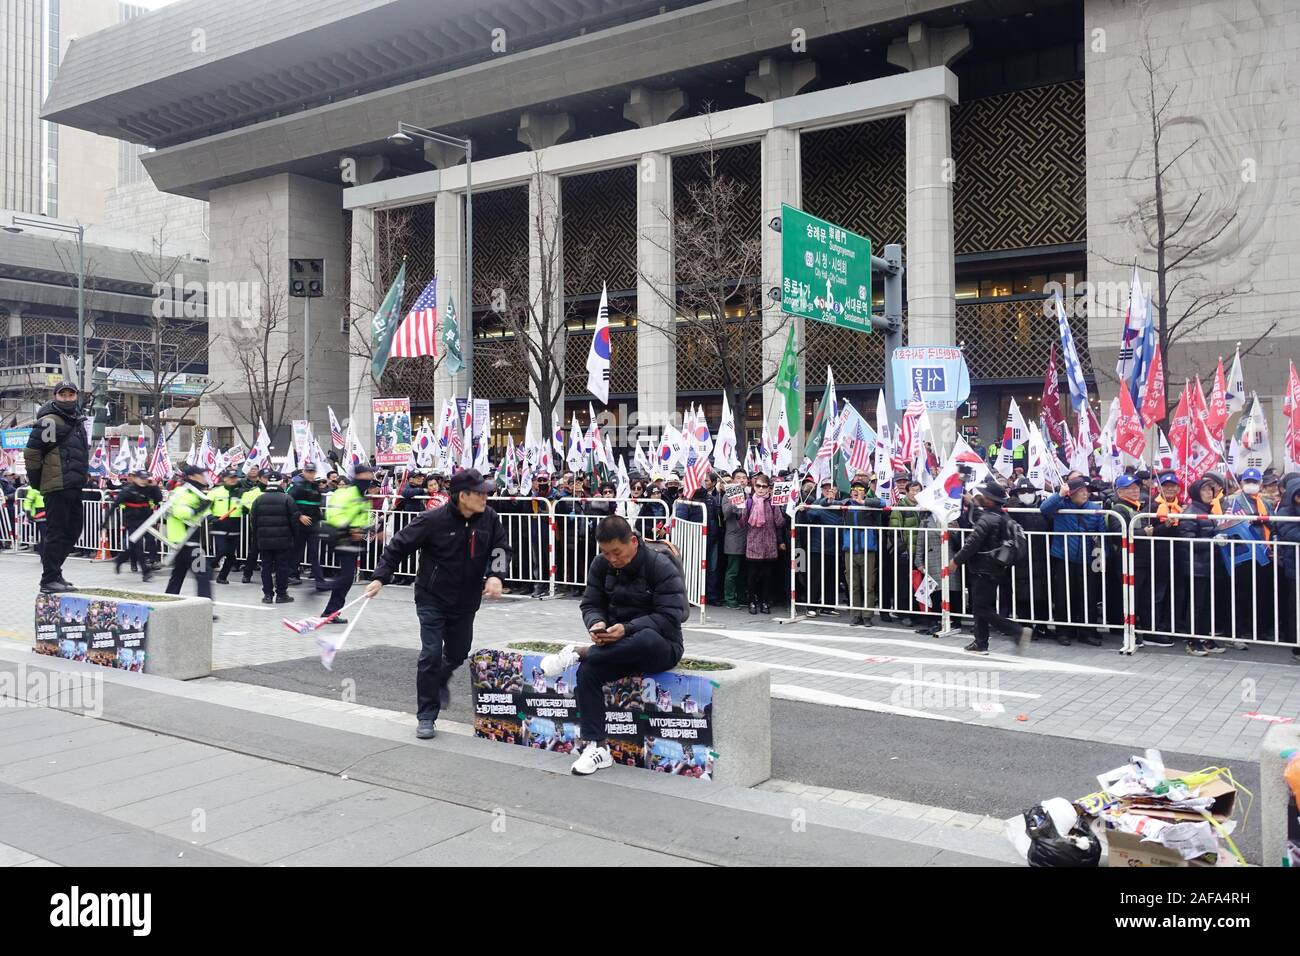 Seoul, South Korea - November 30th, 2019: Hundreds of people in march protesting against the Moon Jae-in administration. Stock Photo